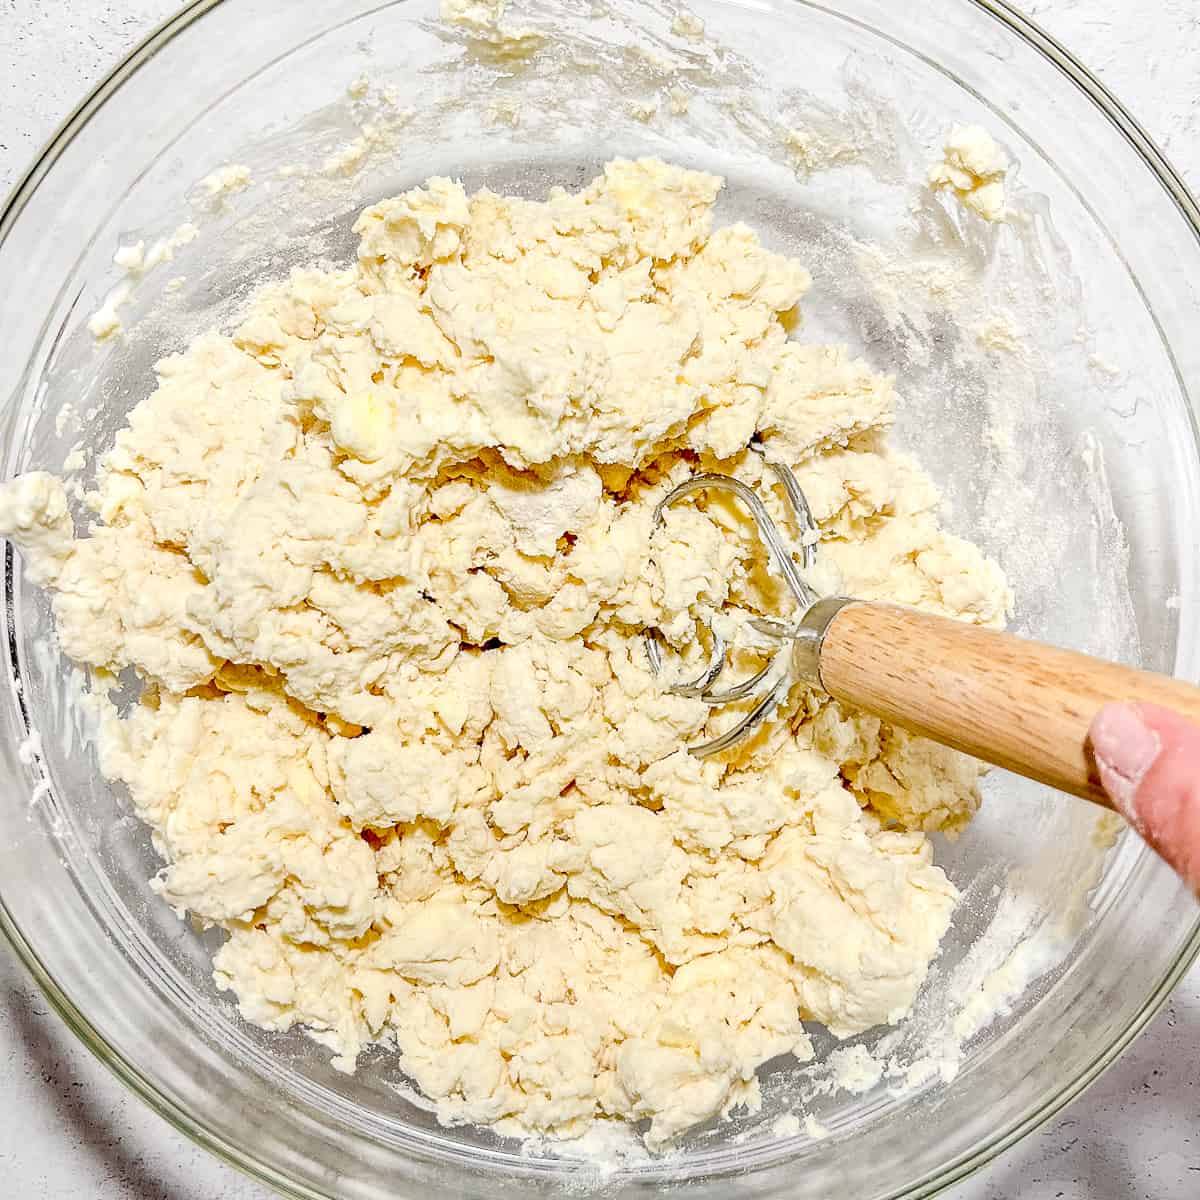 mixing biscuit dough in a bowl.